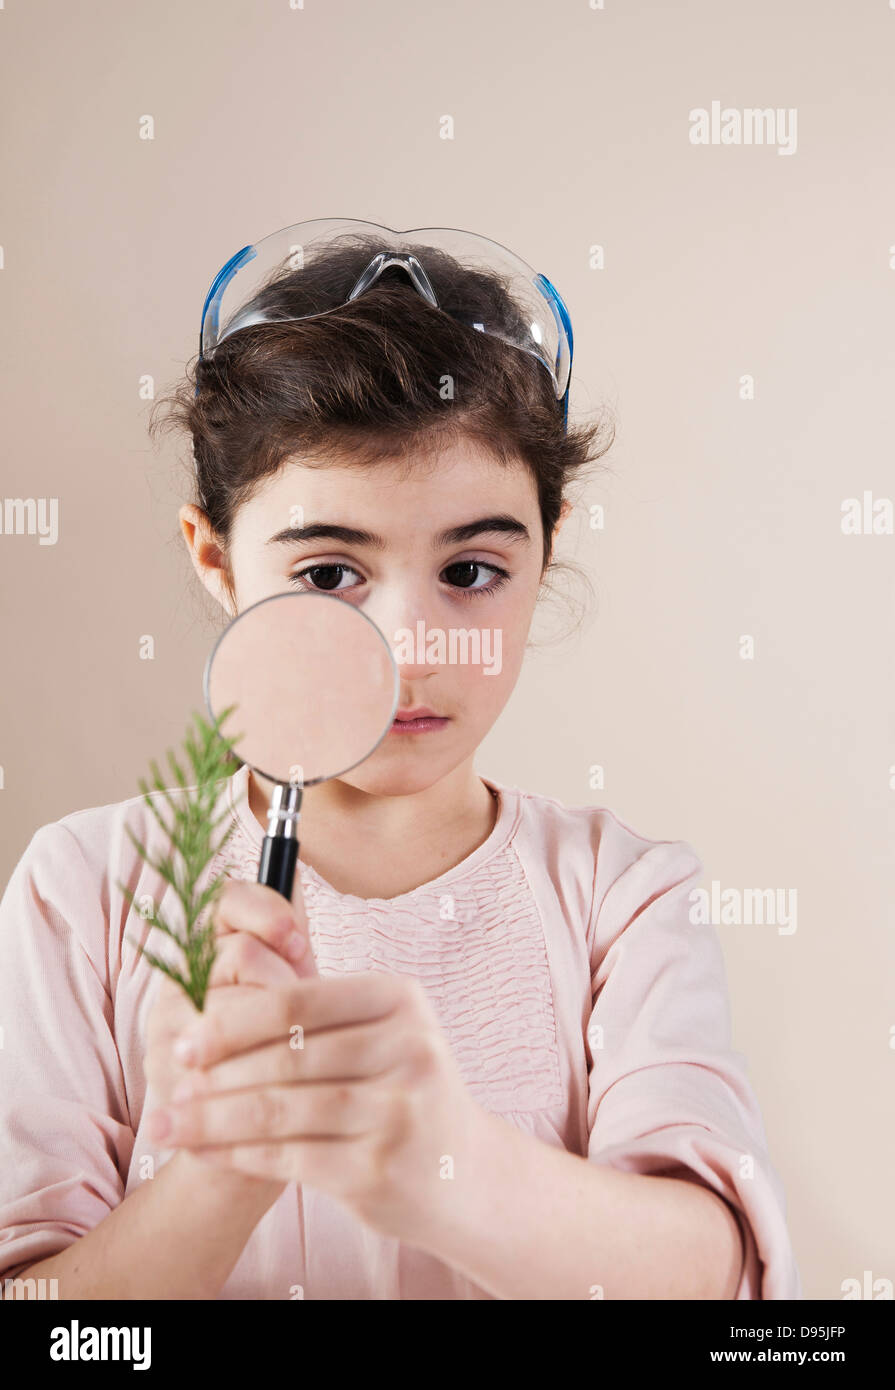 Portrait of Young Girl Wearing Goggles on Head and Looking through Magnifying Glass at Plant, Studio Shot Stock Photo